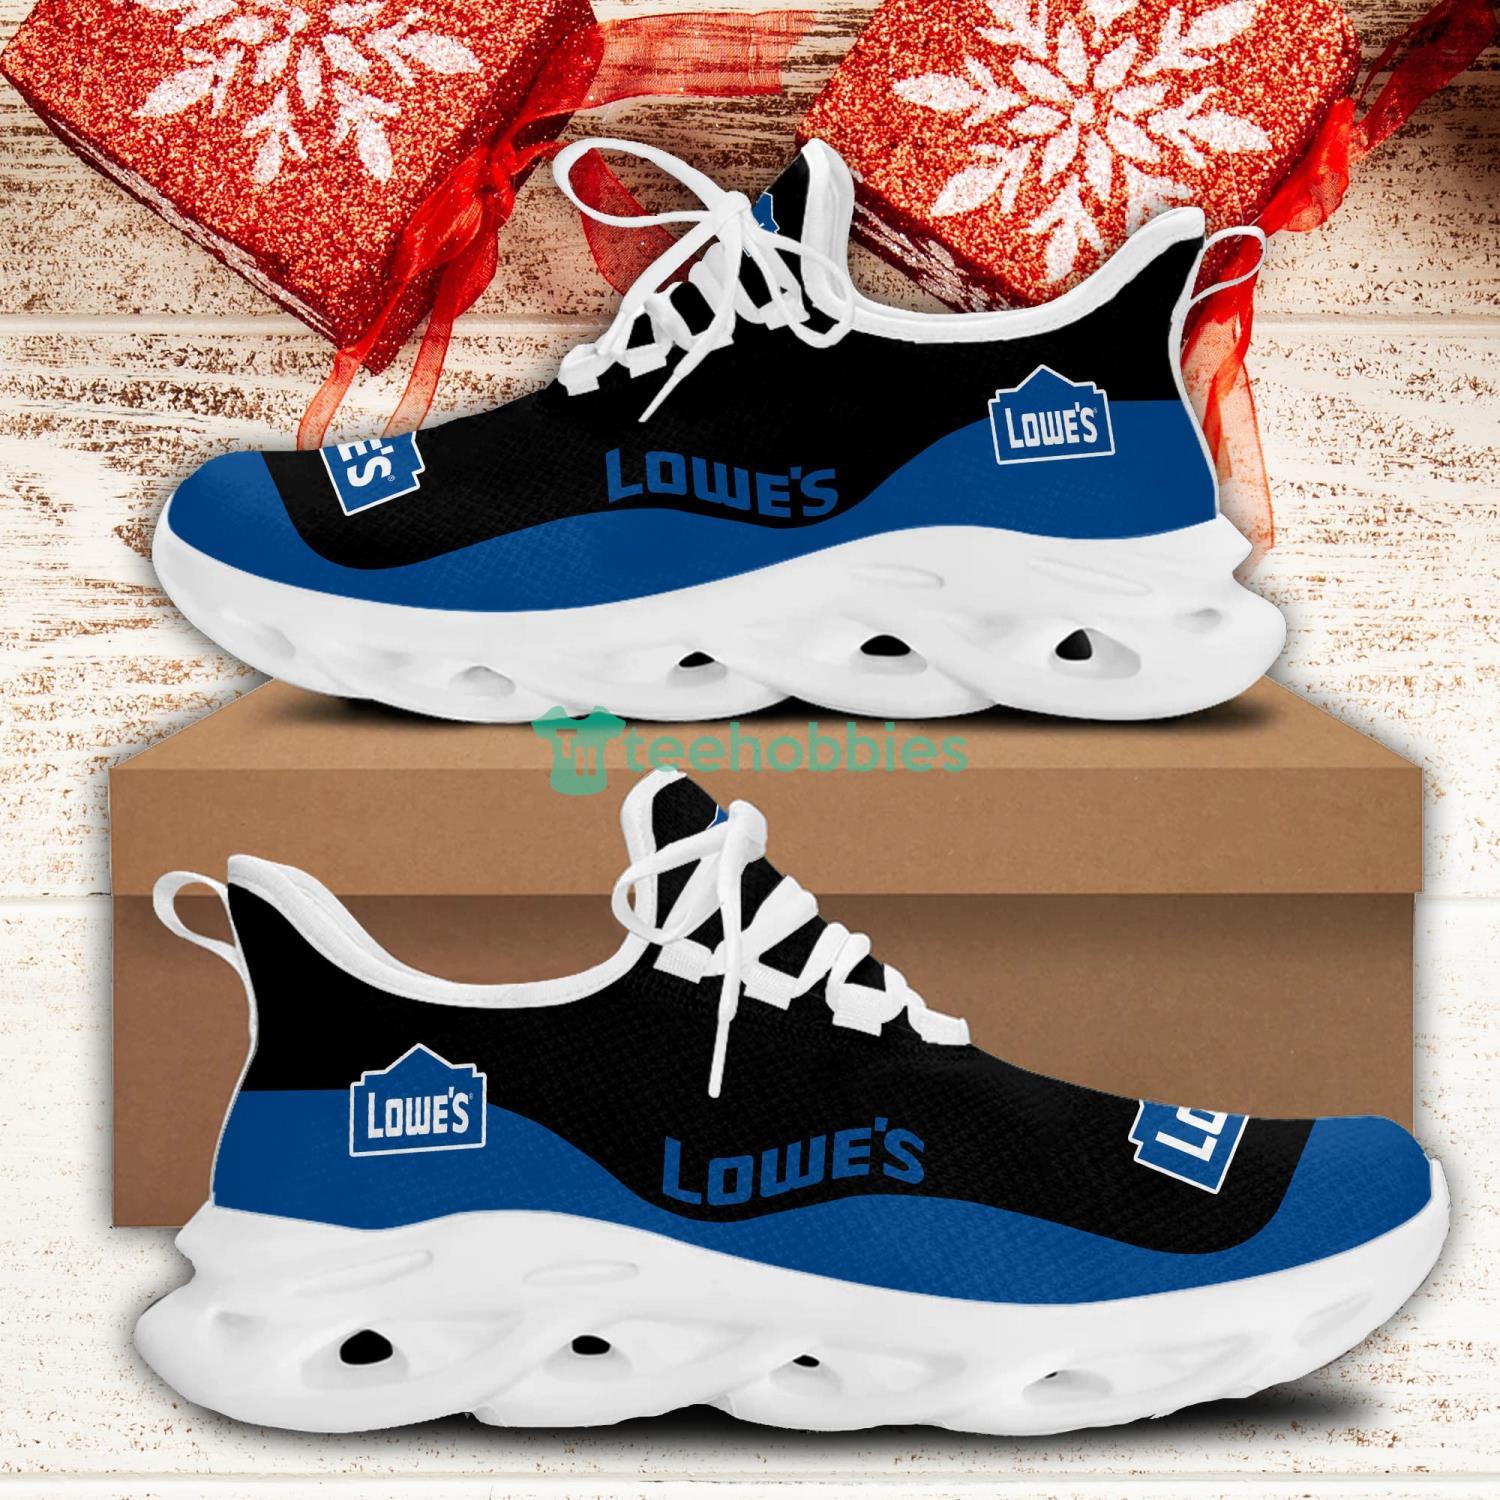 lowes Max Shoes Running Sneakers Black Blue Product Photo 2